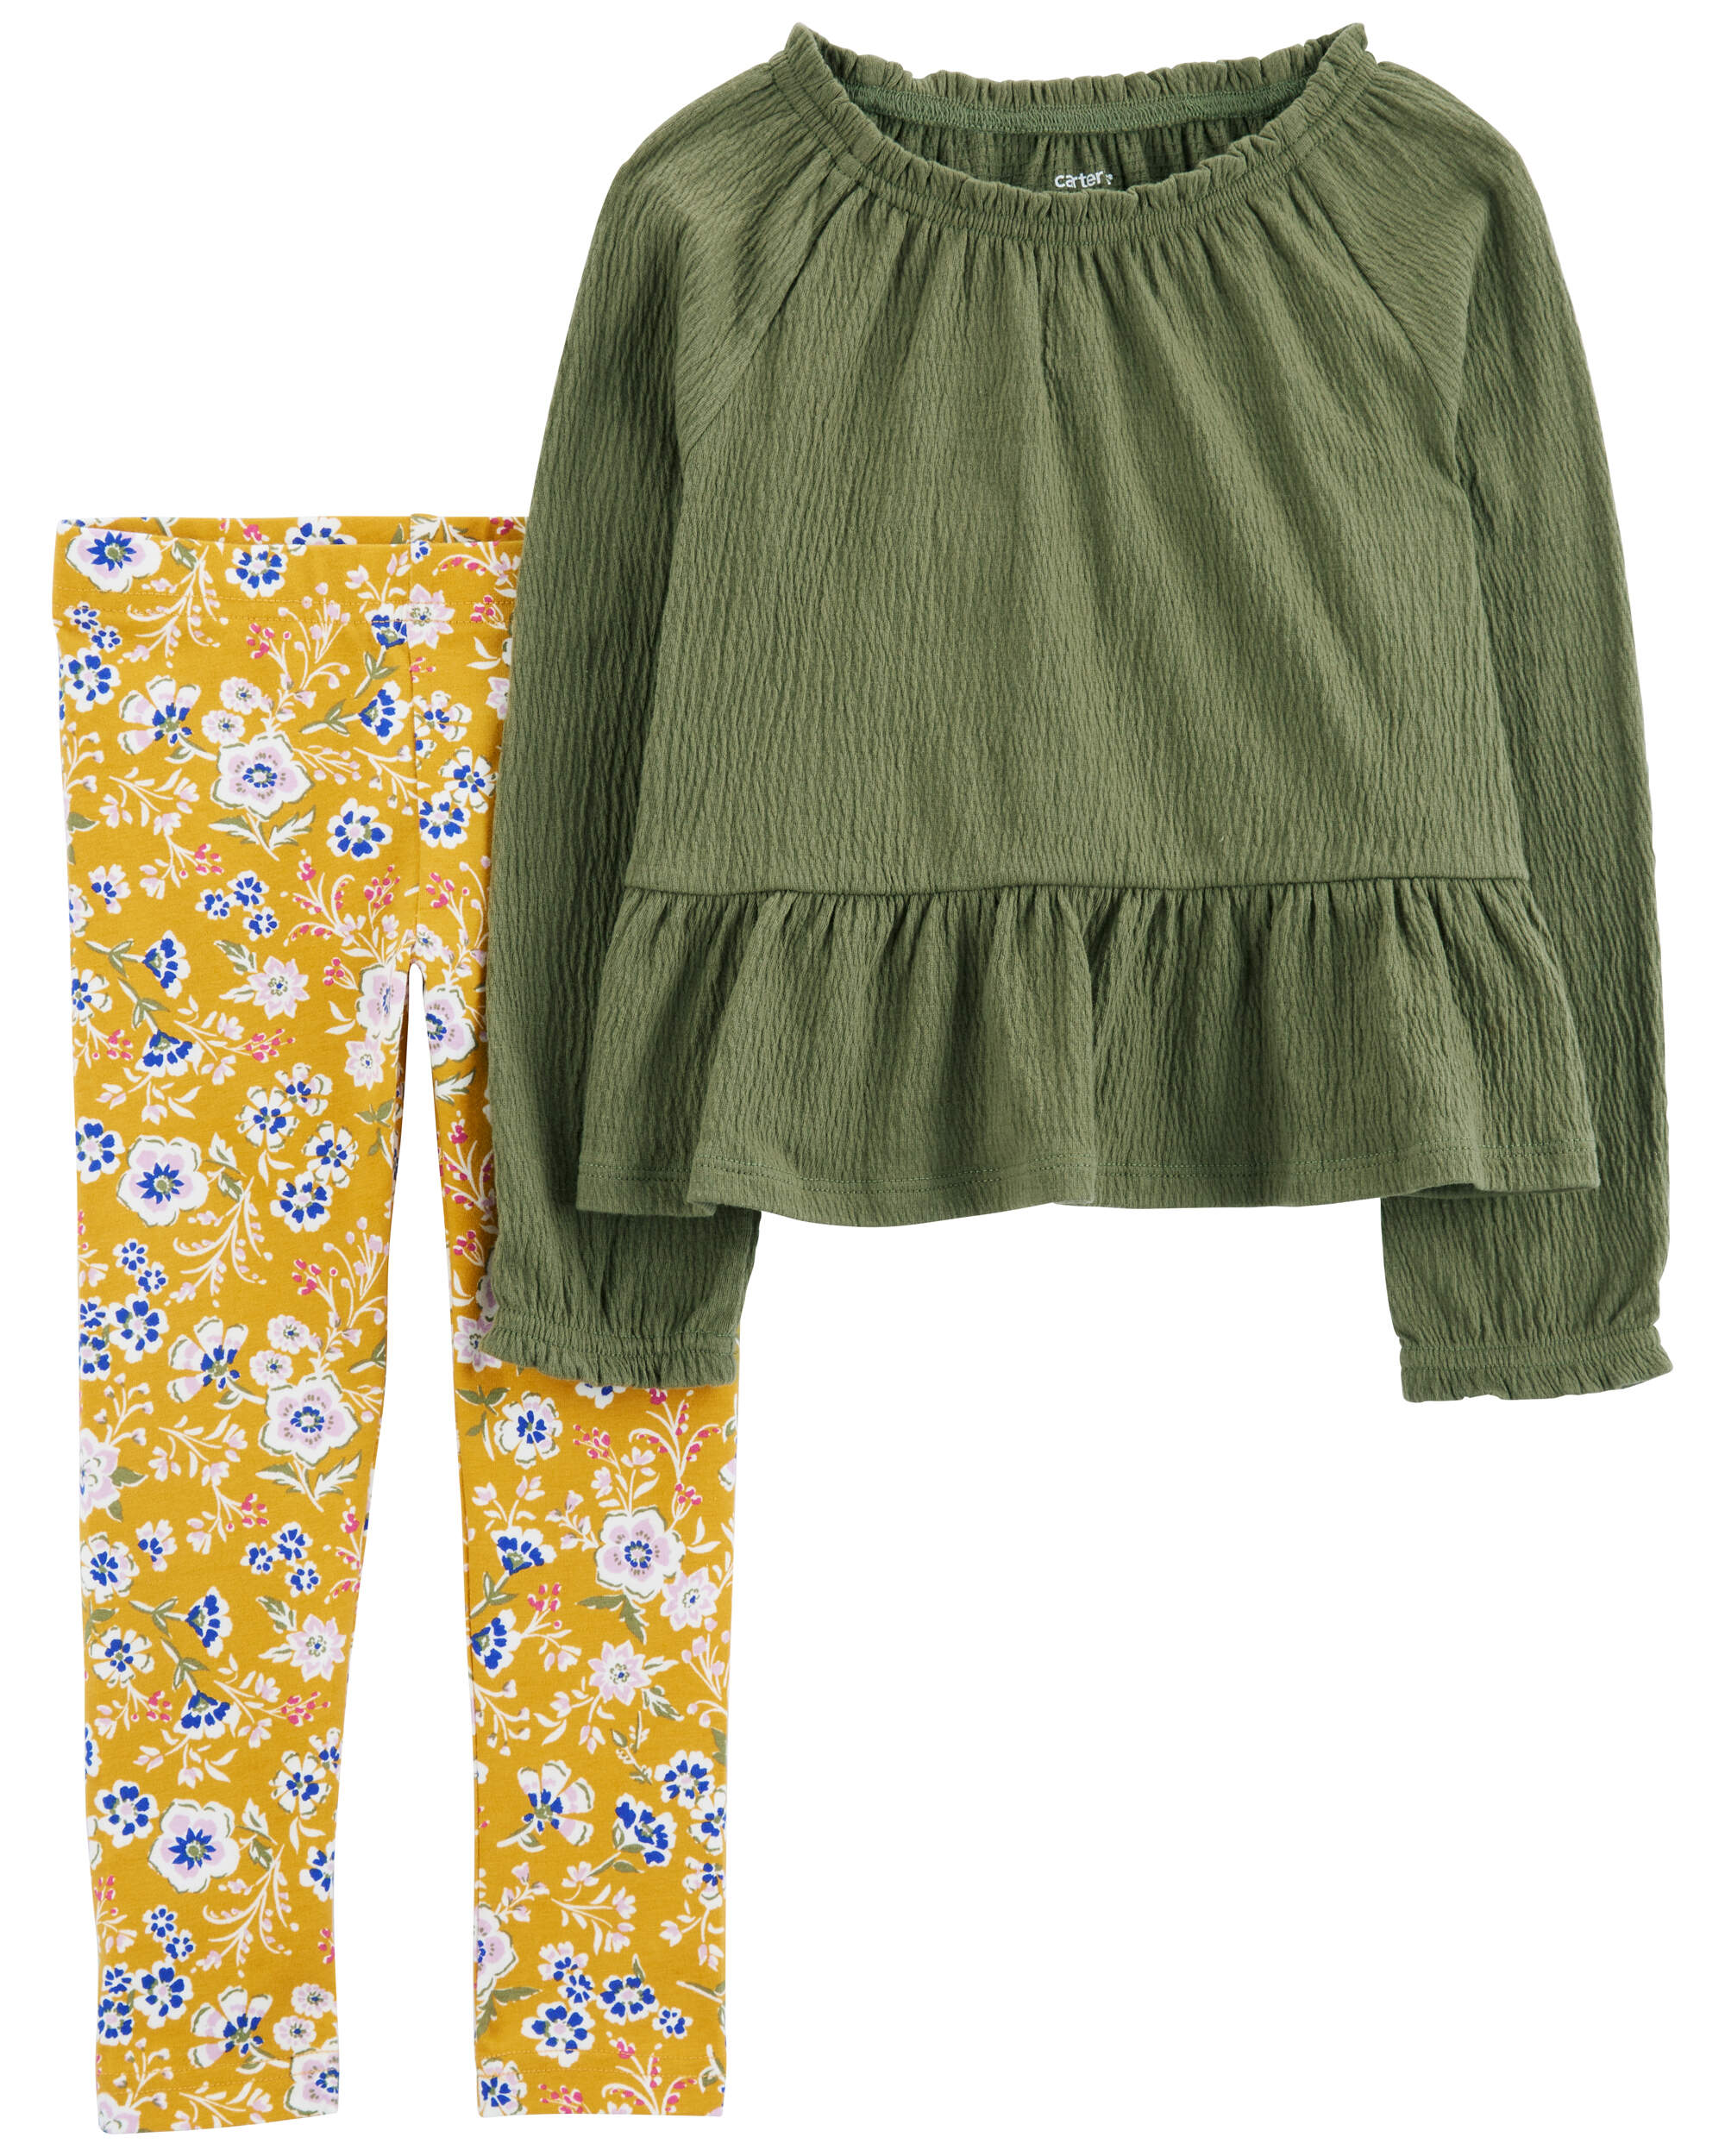 Toddler 2-Piece Woven Top and Floral Legging Set